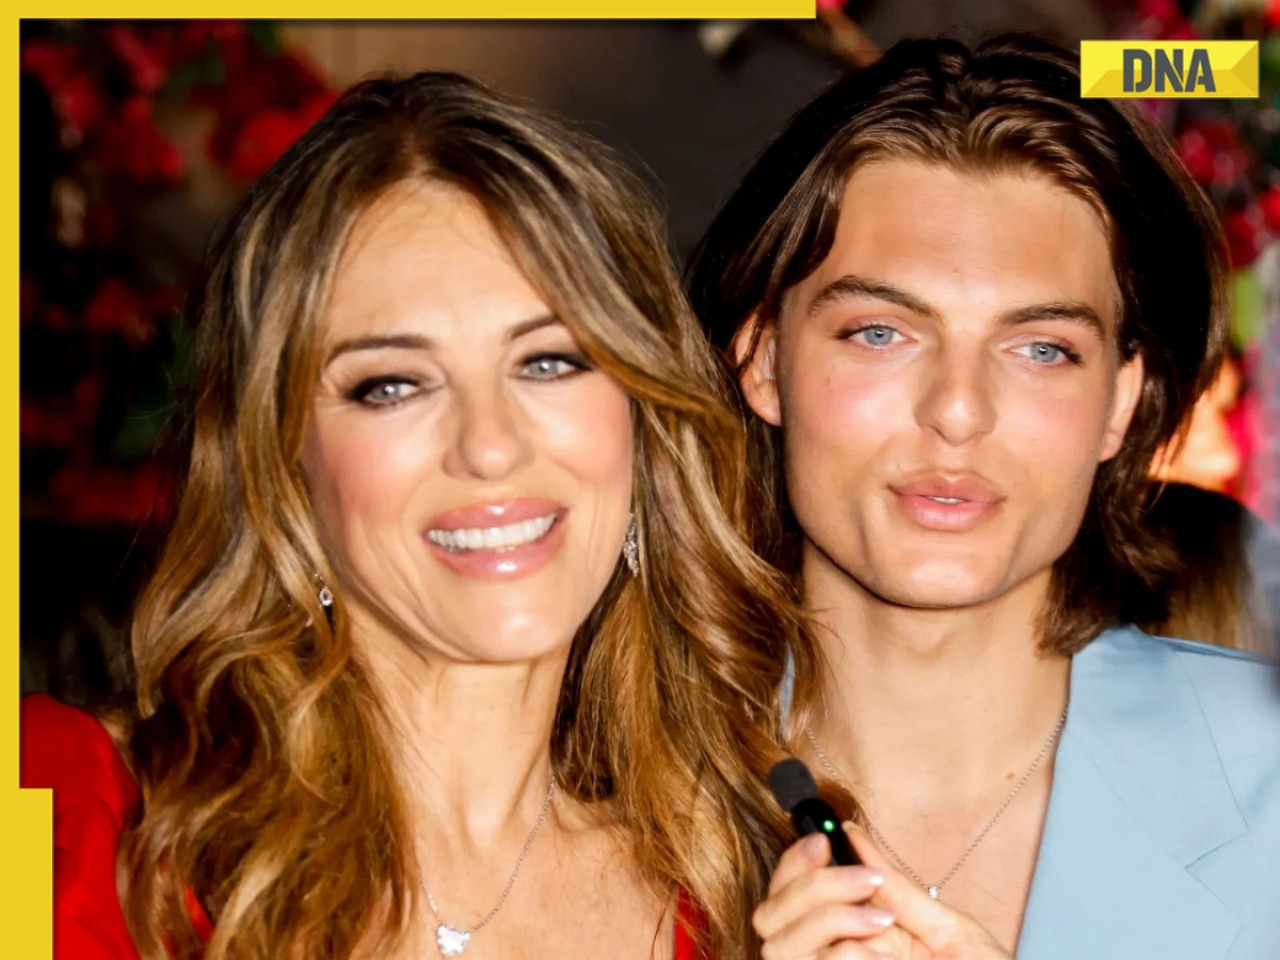 Elizabeth Hurley's son Damian says directing mother in intimate scenes for his film felt 'totally normal'